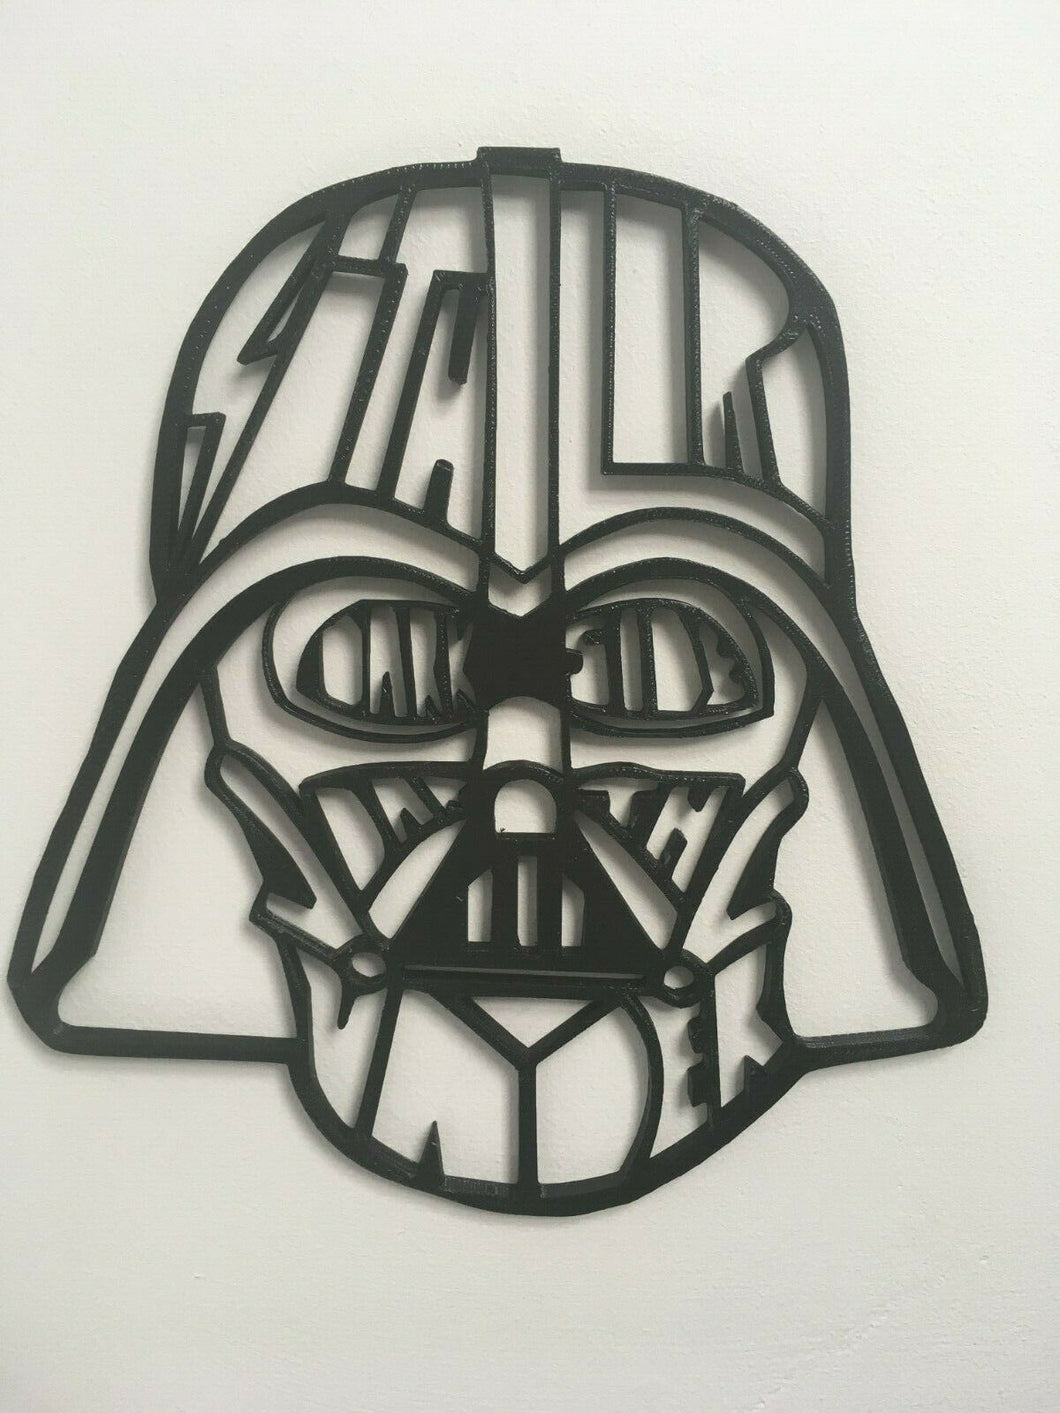 Darth Vader Style Hidden Words Wall Hanging Decoration Pick Your Colour